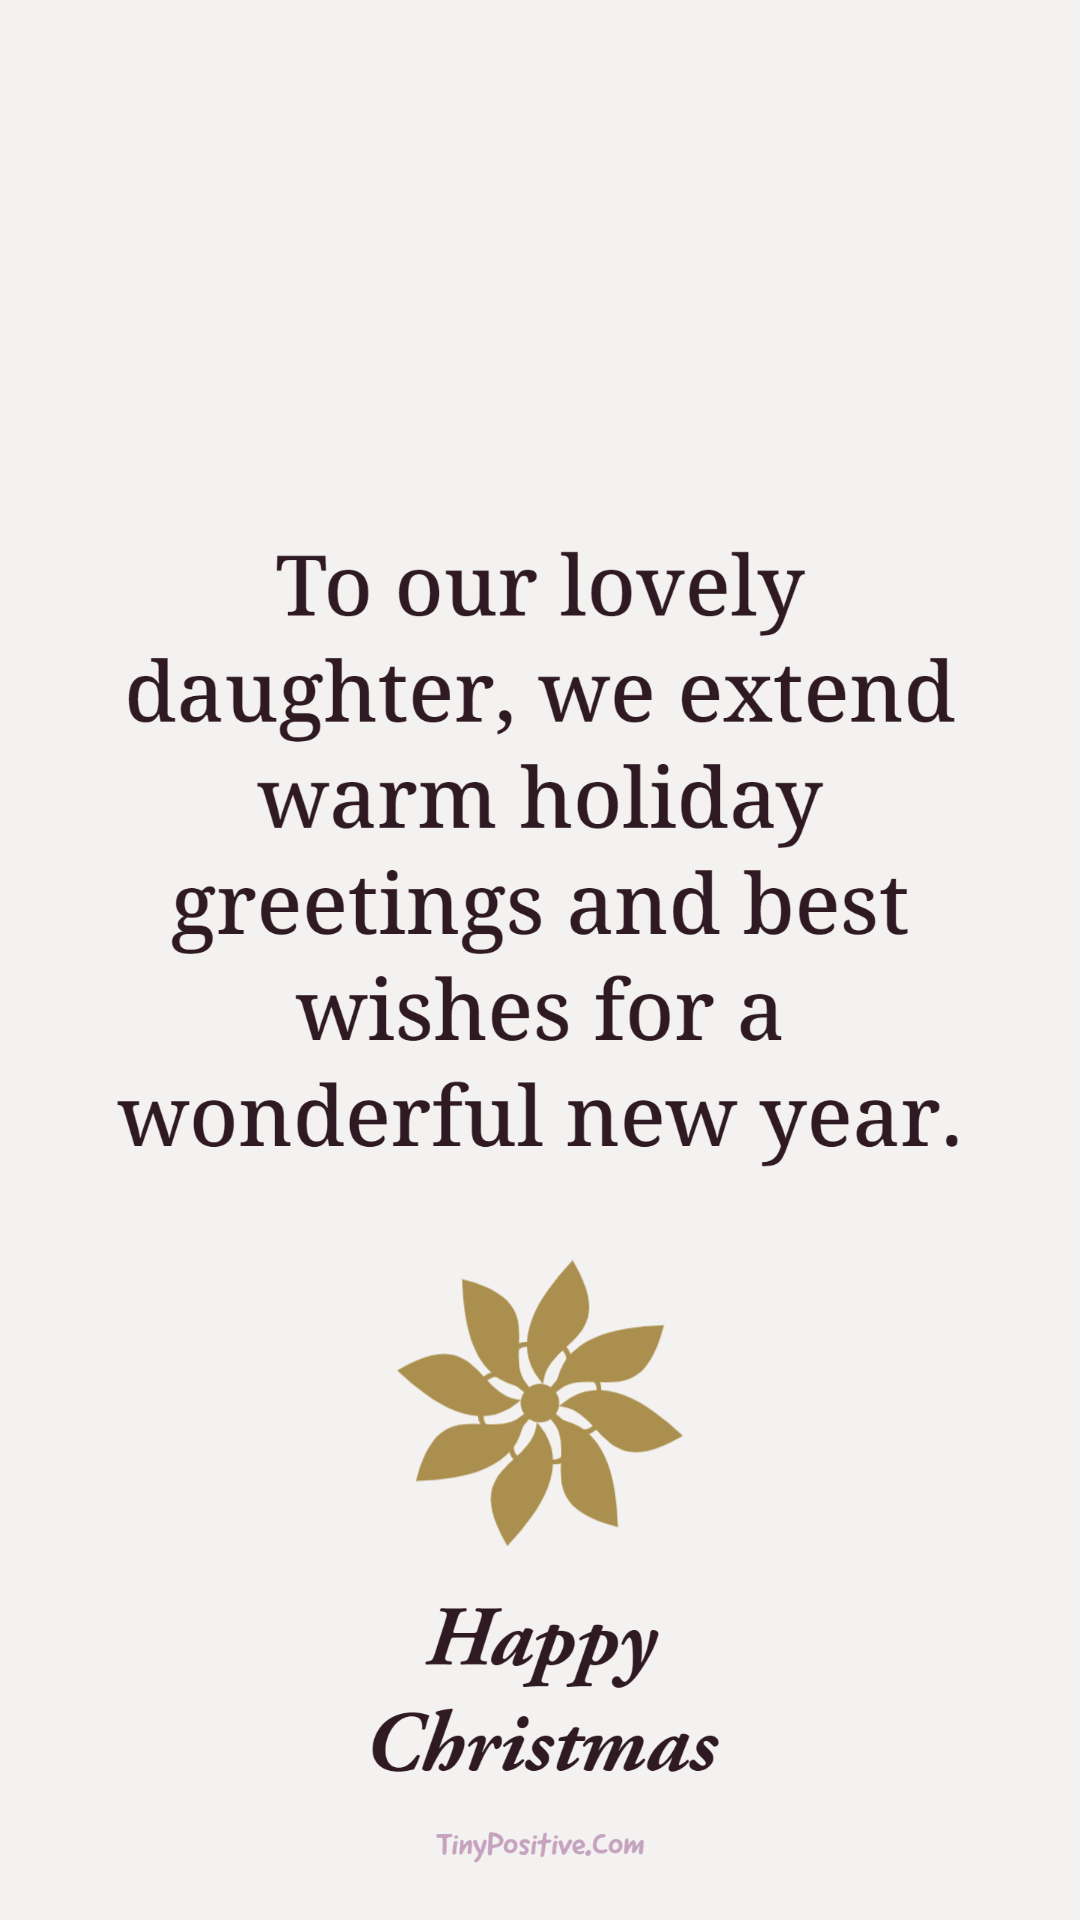 christmas messages for daughter greetings for xmas